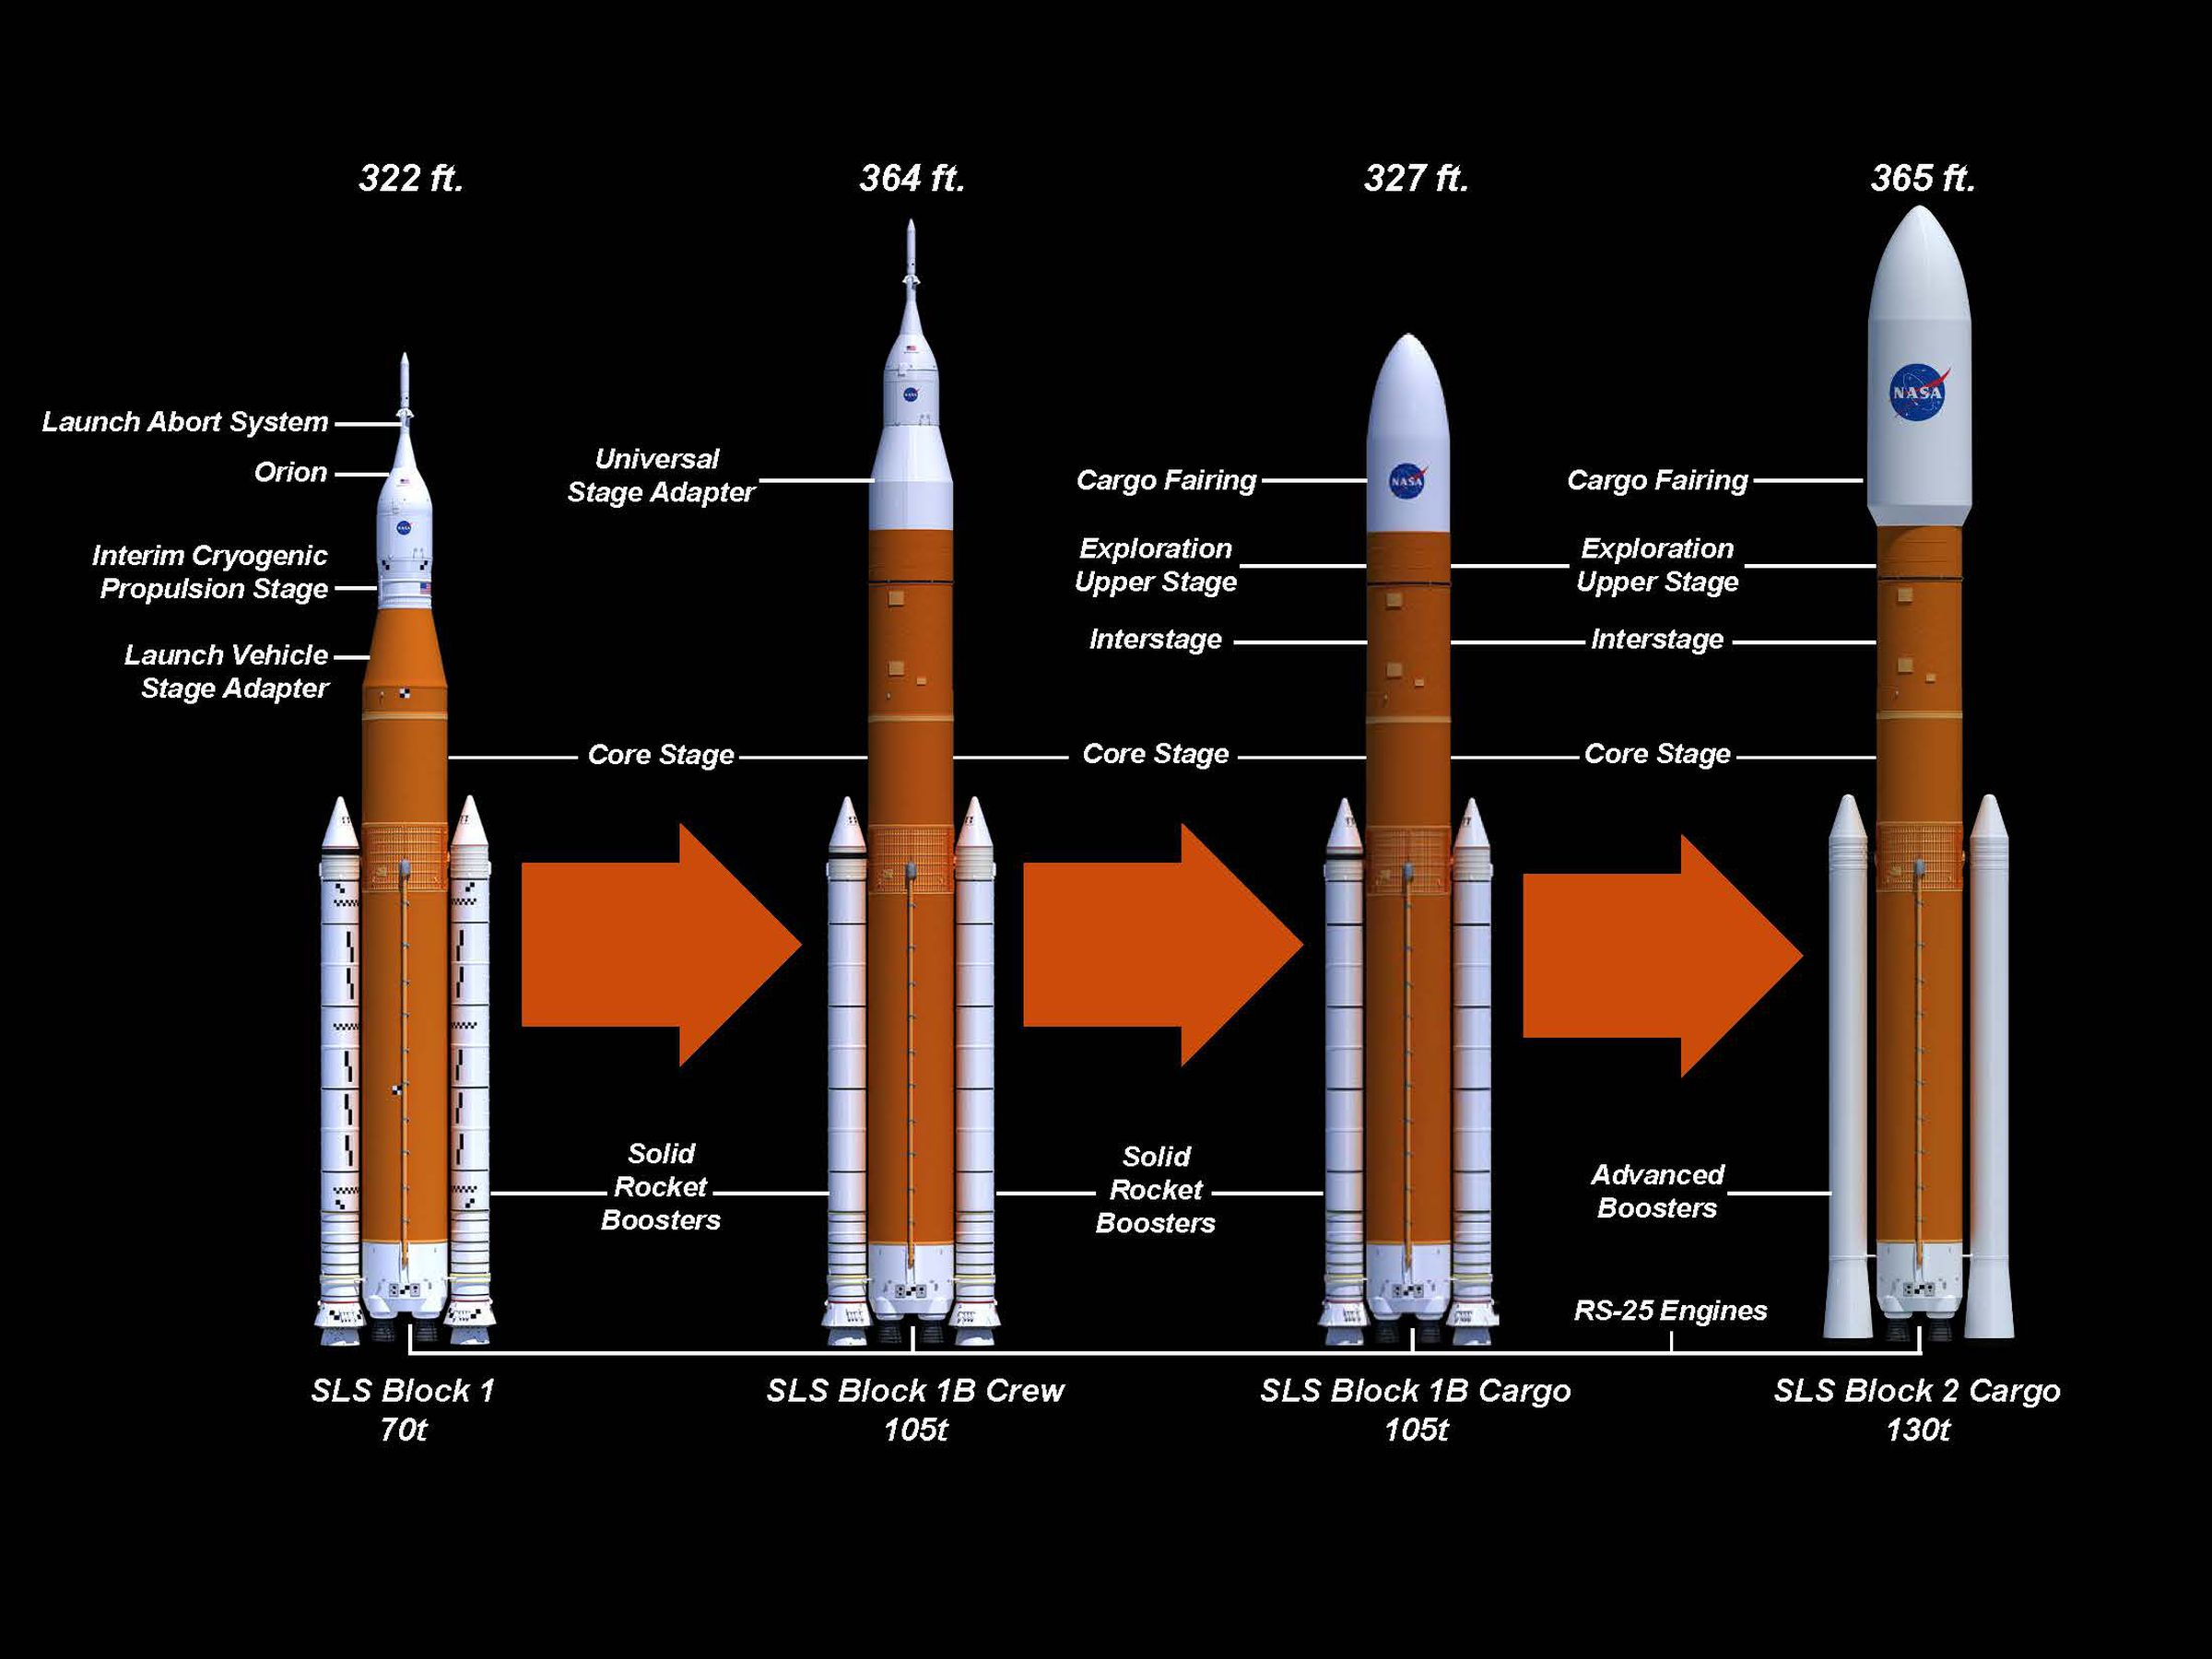 The different planned versions of the SLS